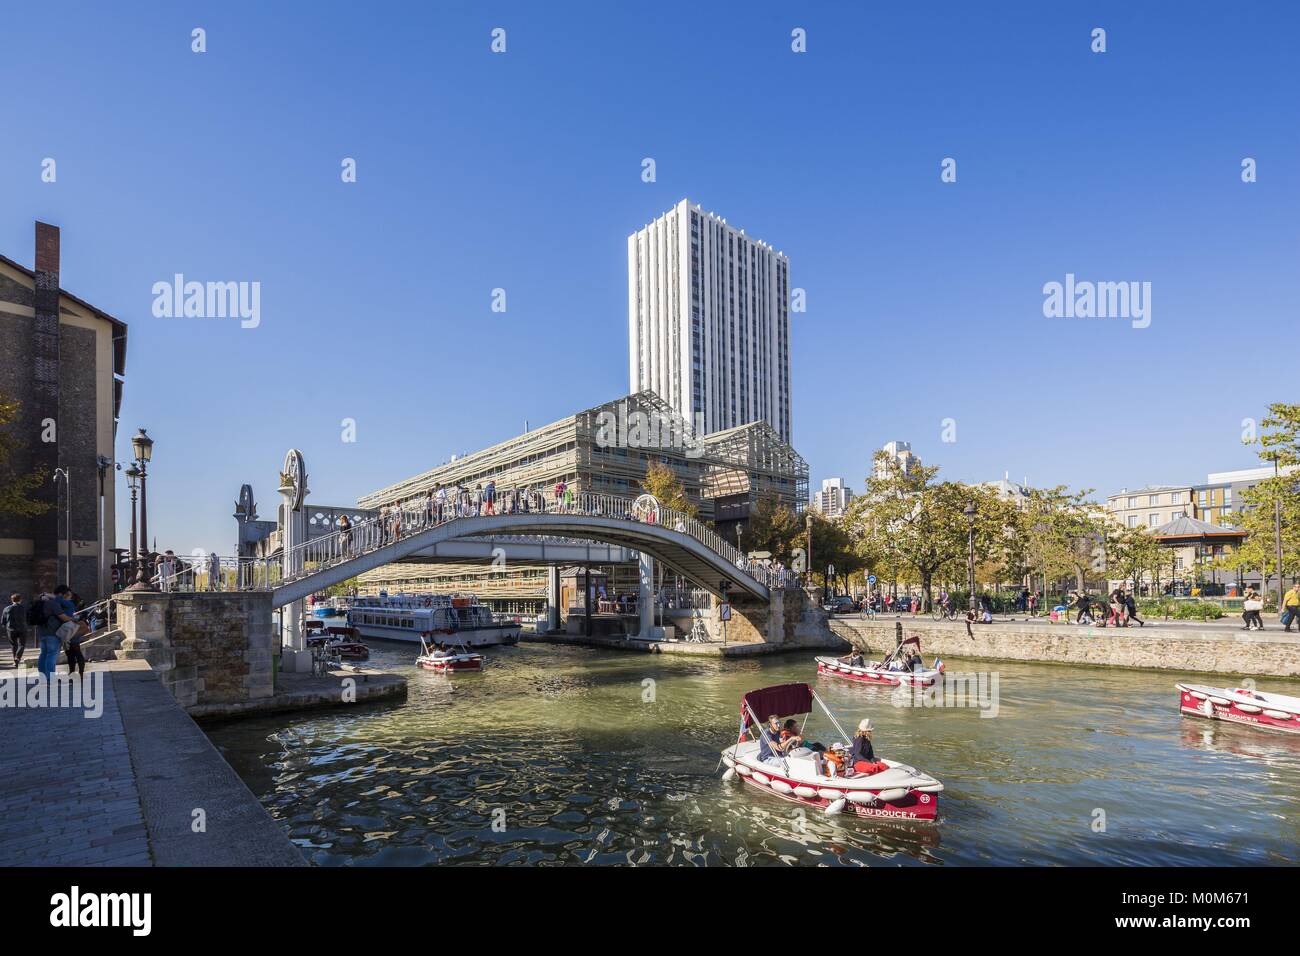 France,Paris,Bassin de la Villette,the largest artificial body of water in Paris,that links the Canal de l'Ourcq to the Canal Saint-Martin,cruise on the canals,bridge raising of the street of Crimea Stock Photo